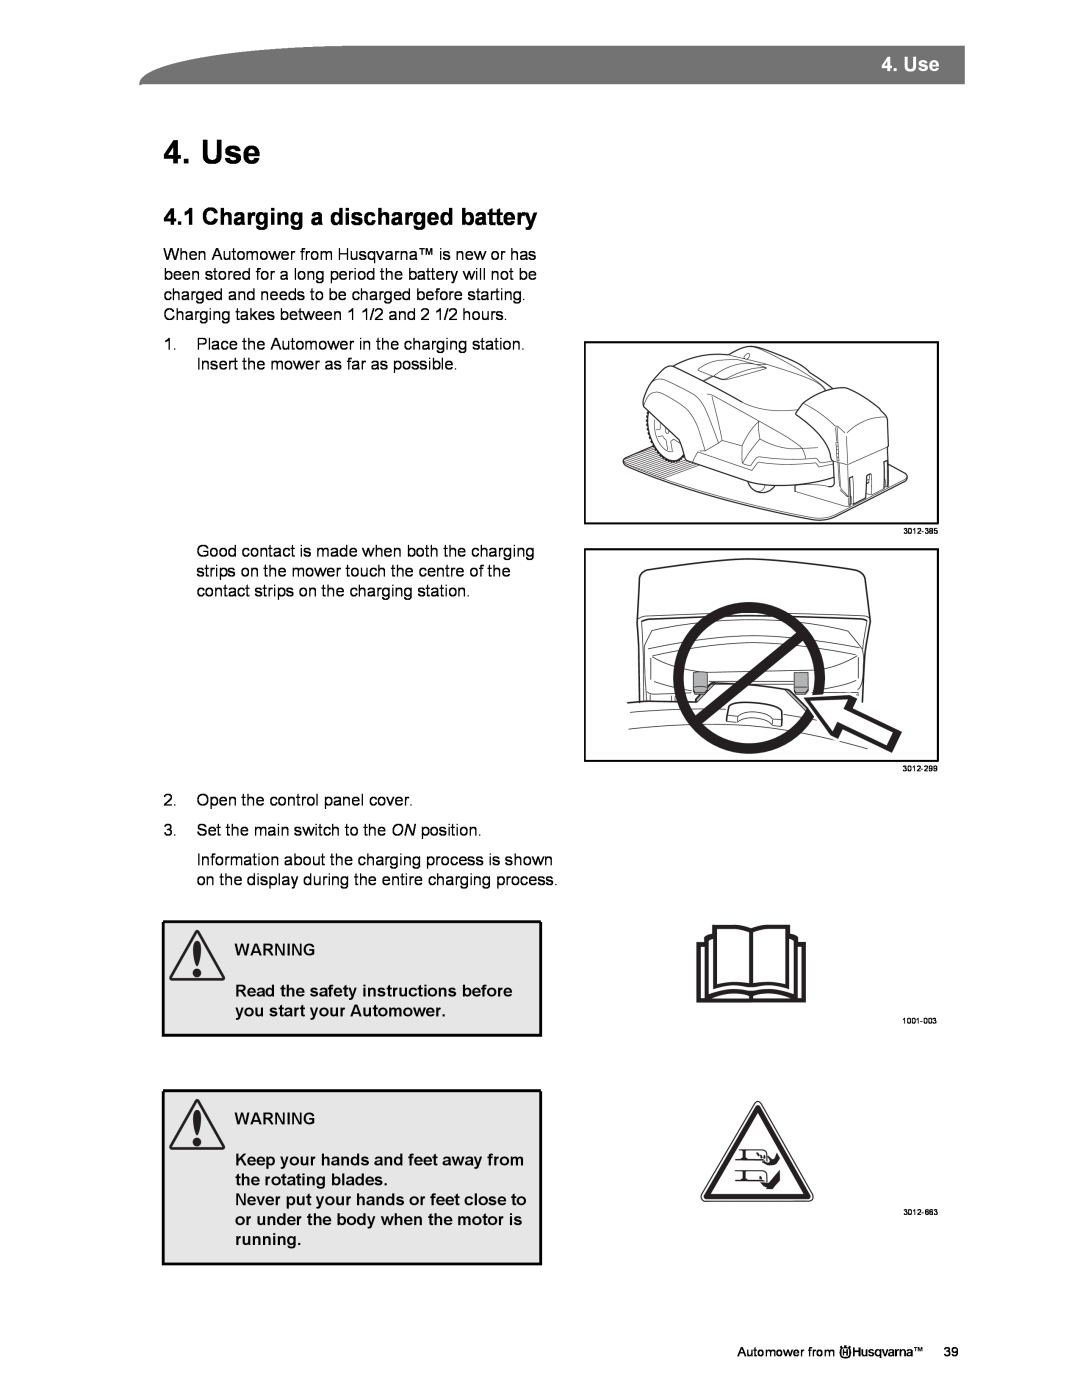 Husqvarna Automower manual Use, Charging a discharged battery 